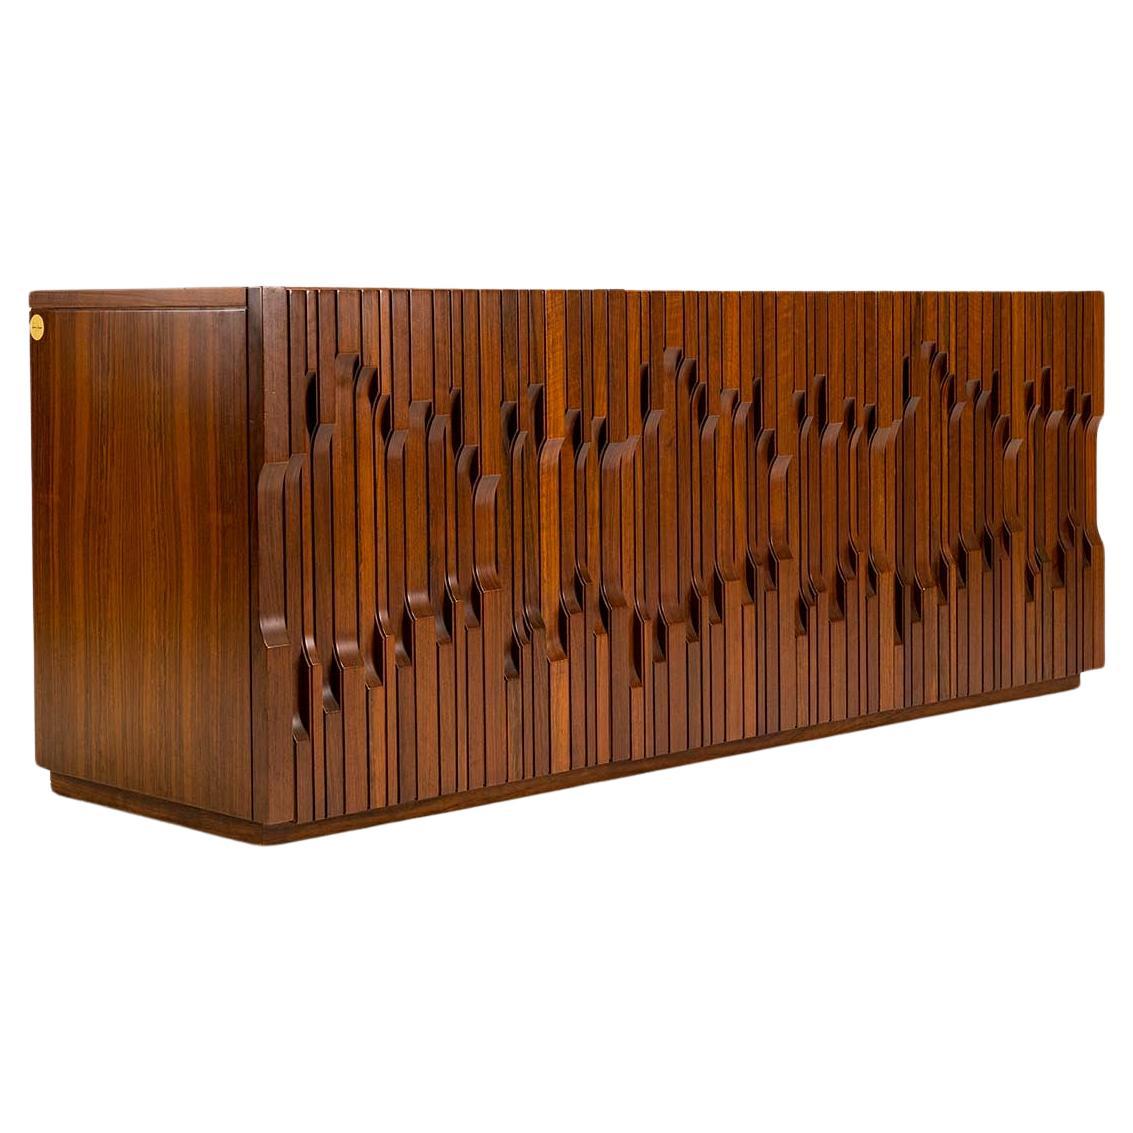 Brutalist Sideboard Model "Norman" in African Walnut by Luciano Frigerio, 1950s